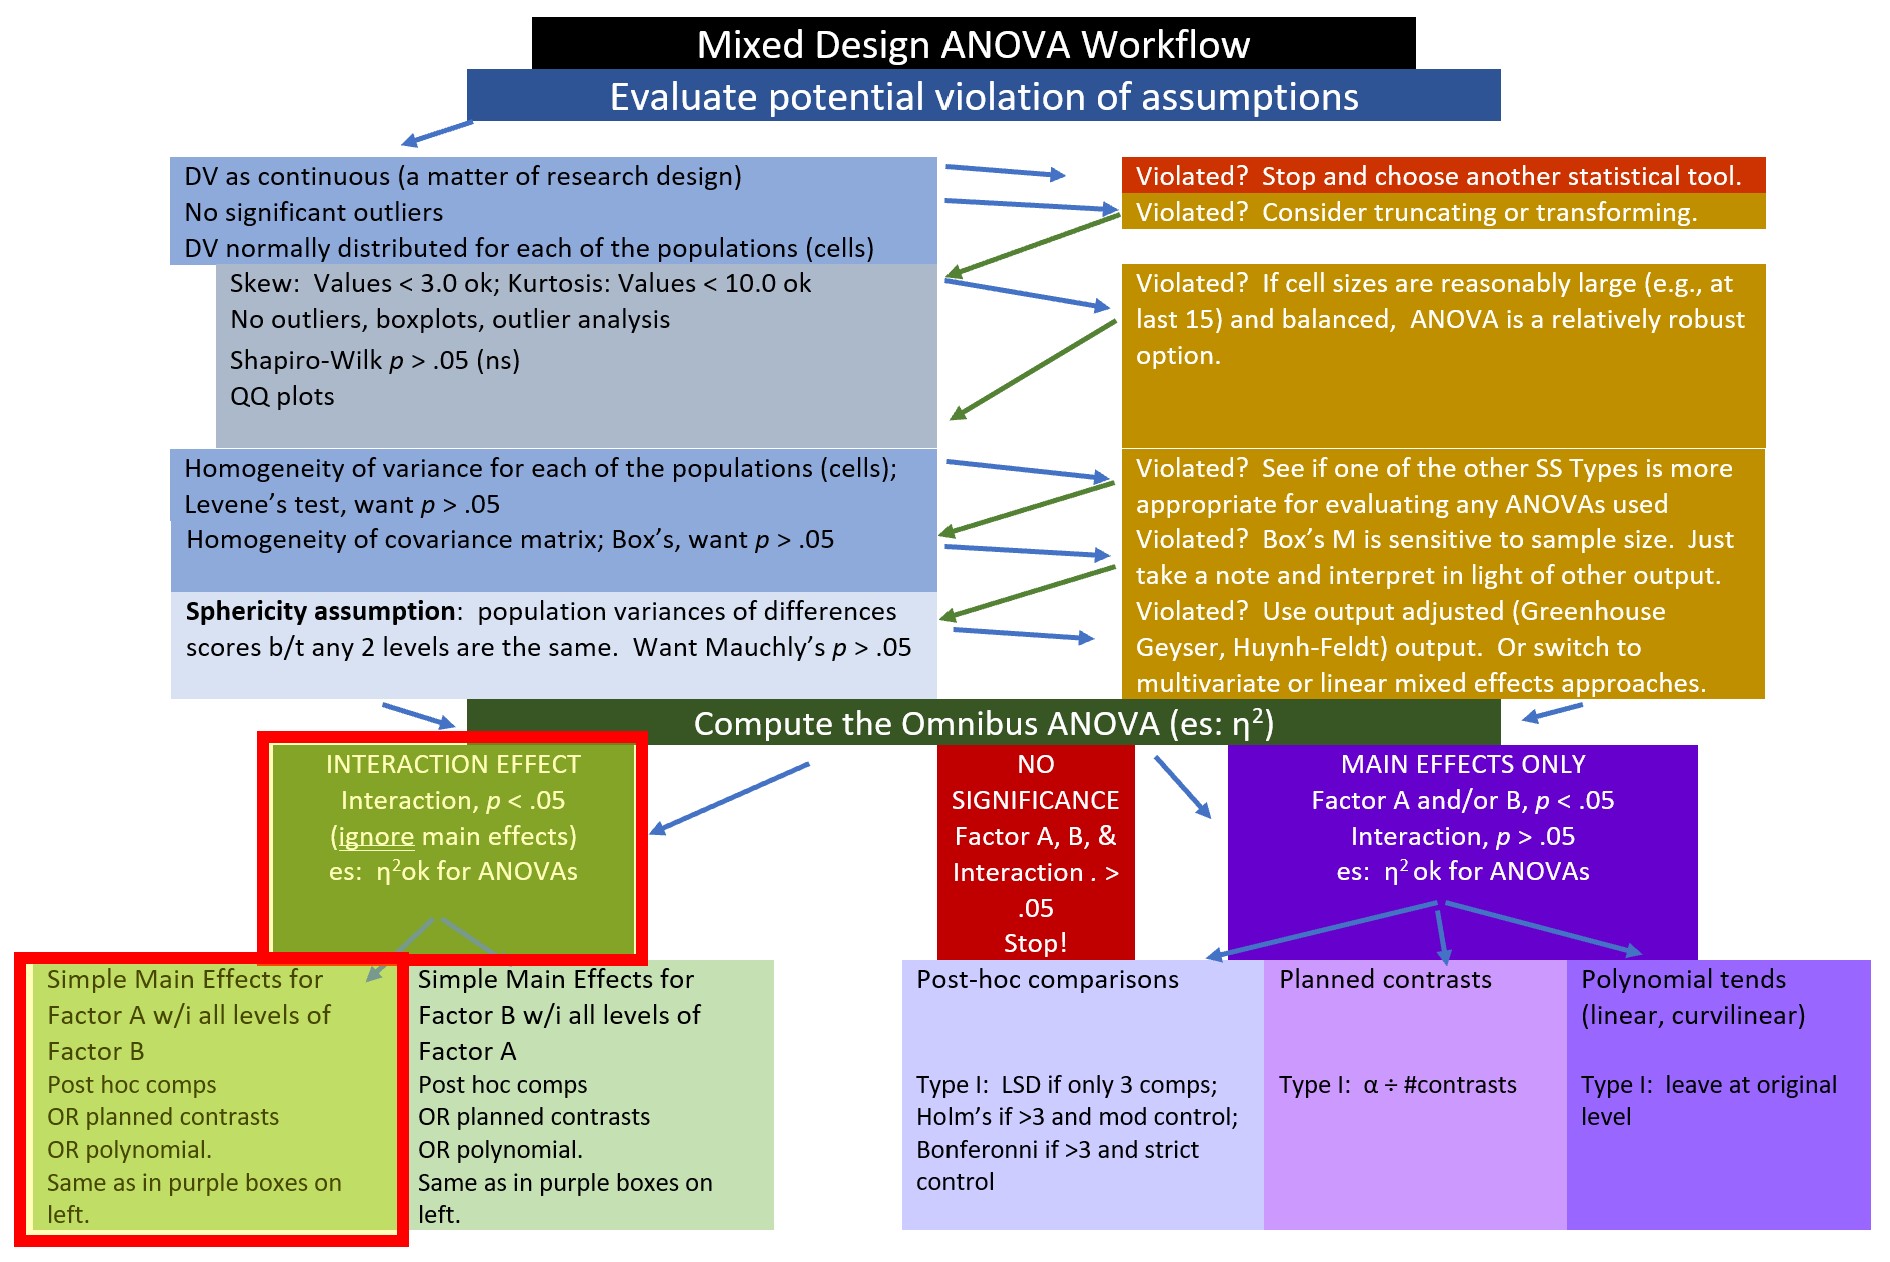 Image of the workflow showing that we are at the “Simple Main Effects for Factor A within all levels of Factor B” step